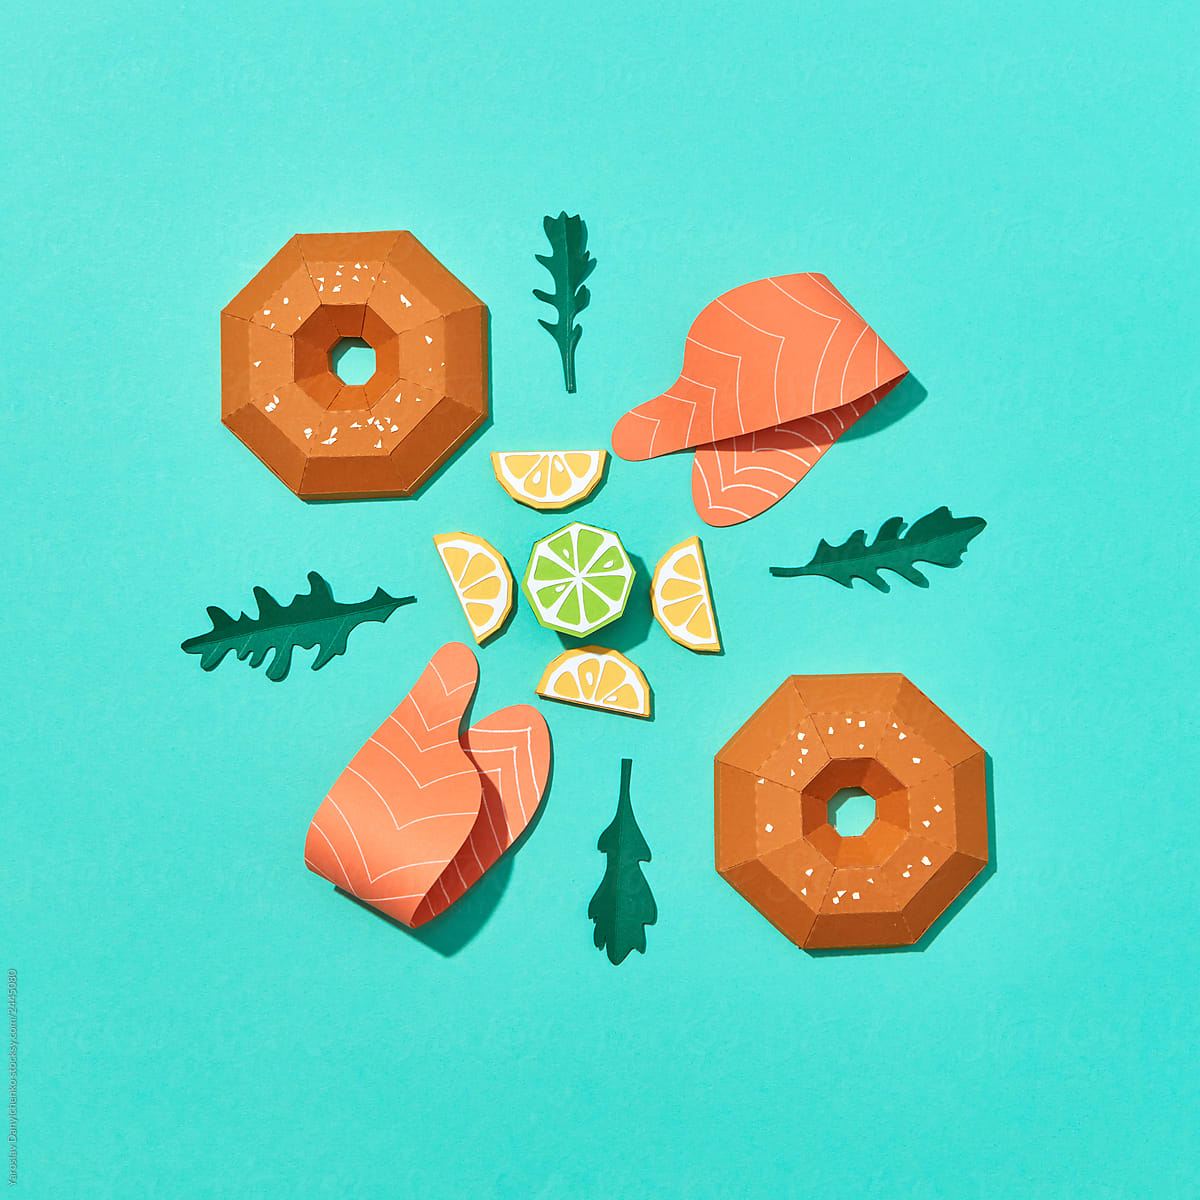 Paper handcraft products for a bagel with salmon.